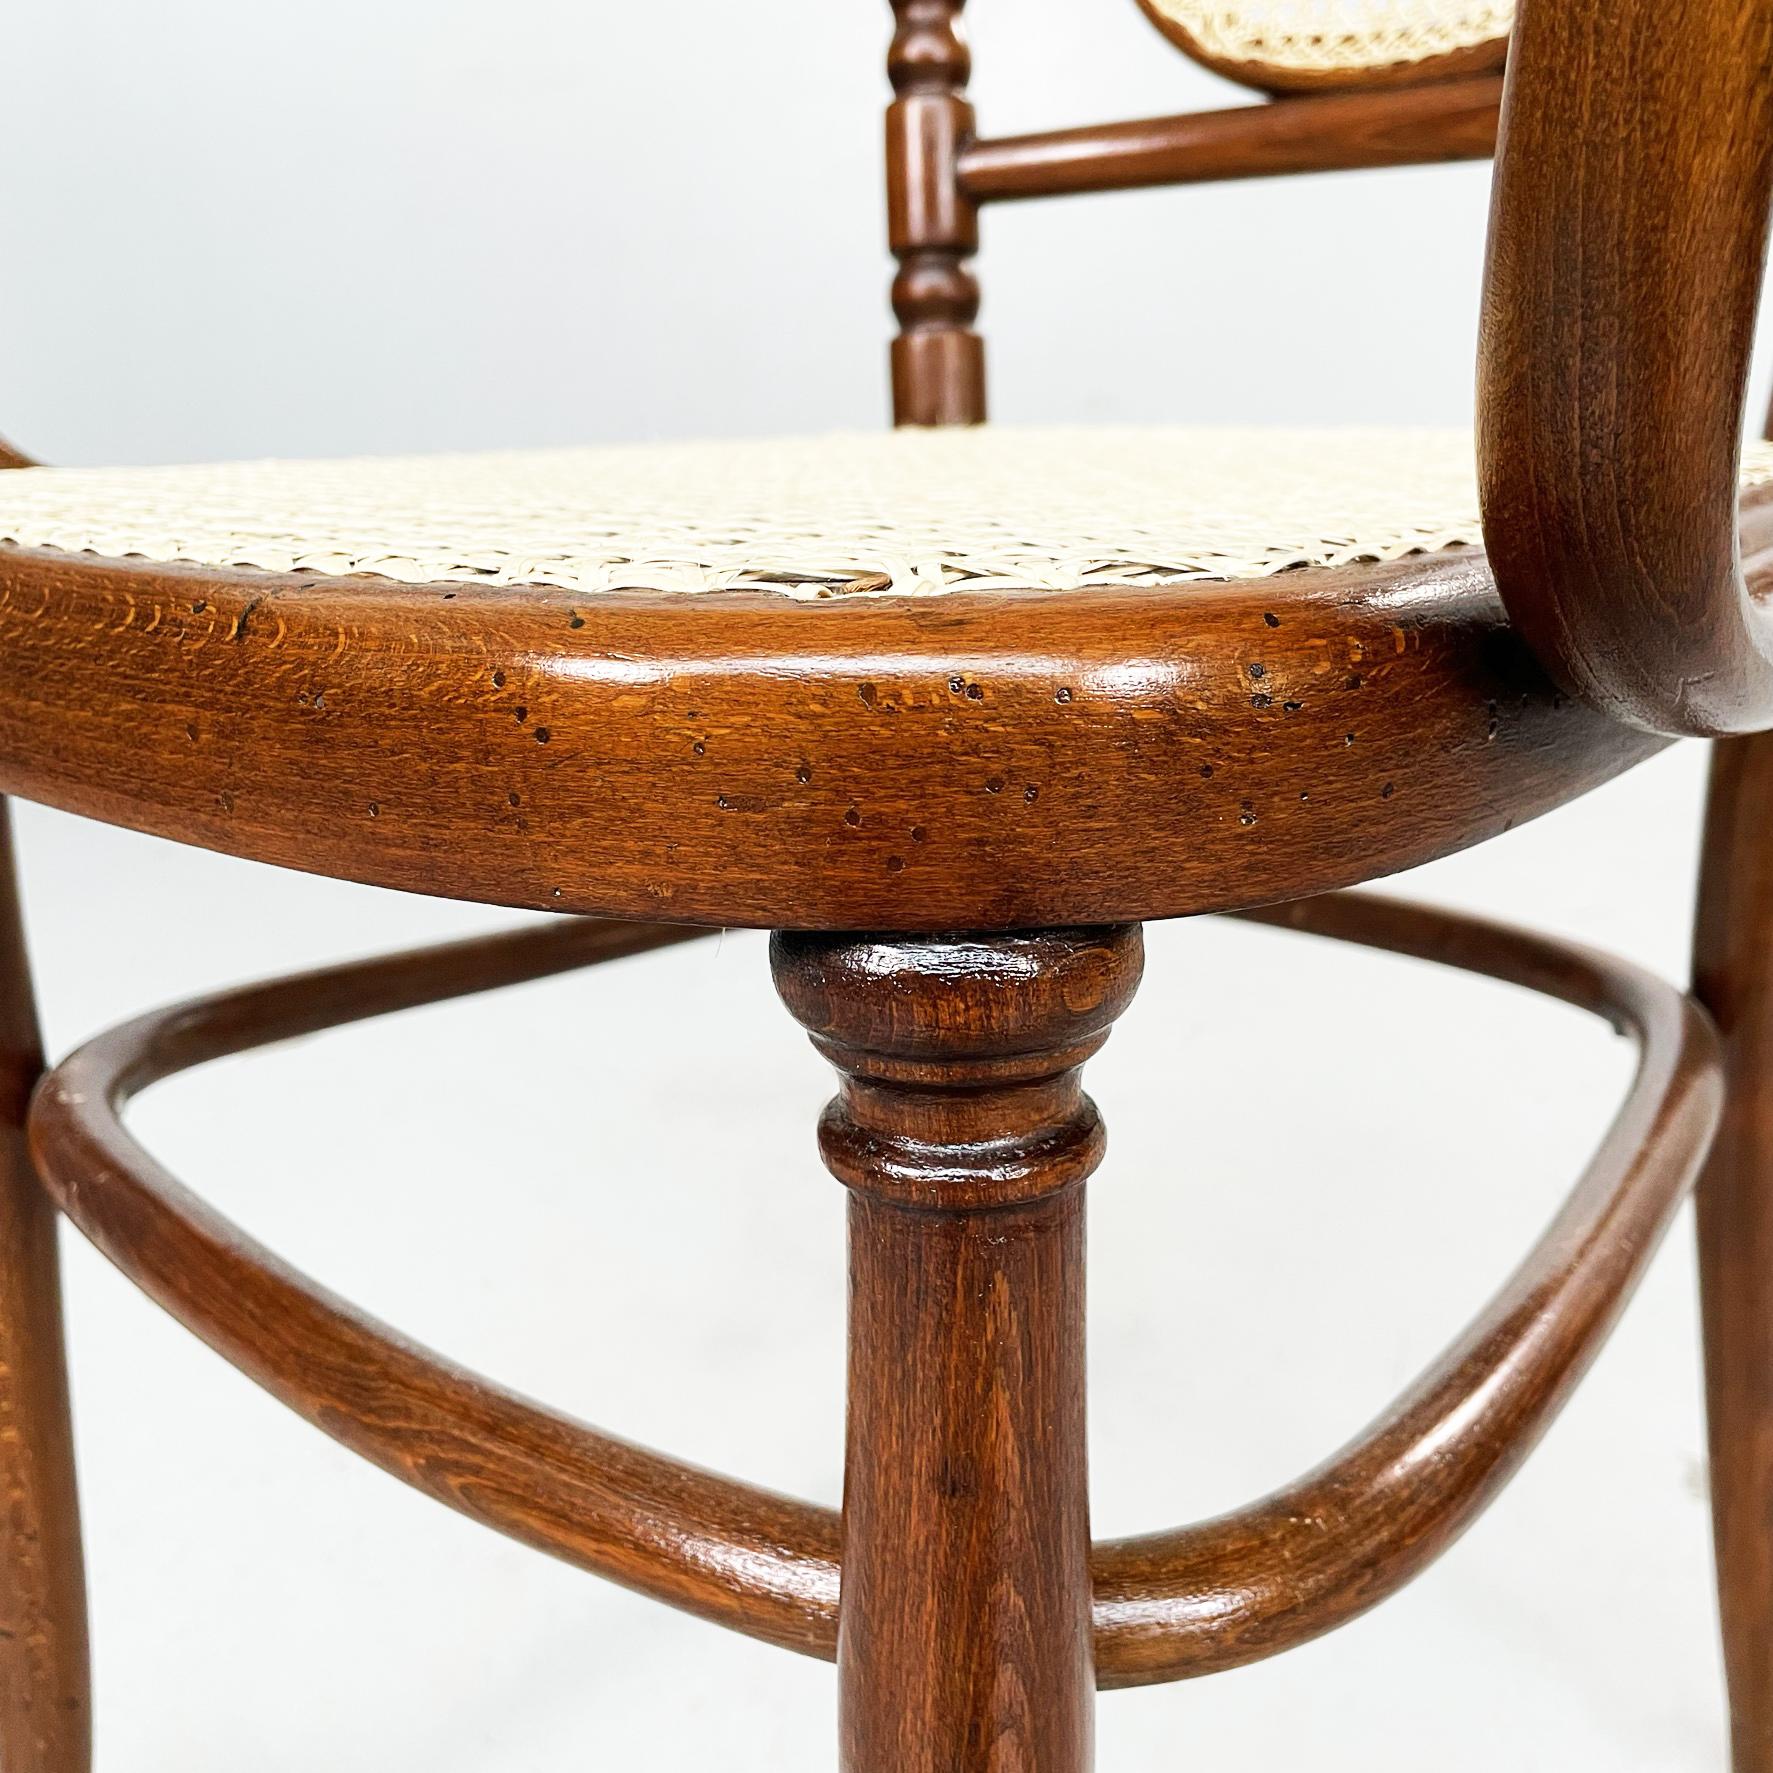 Austrian Chairs with Straw and Wood by Thonet, 1900s For Sale 5